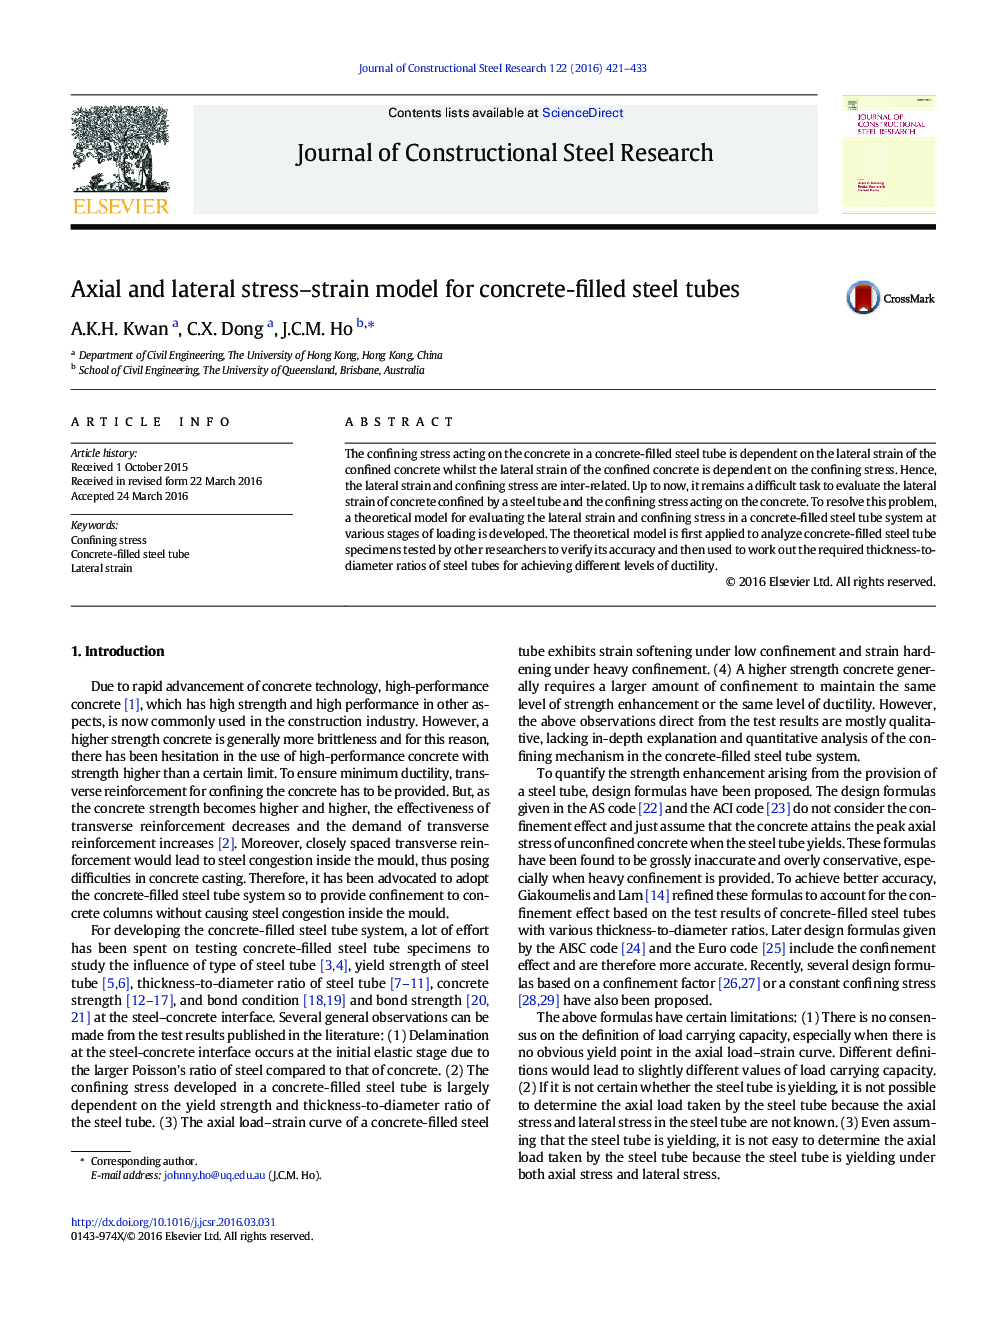 Axial and lateral stress-strain model for concrete-filled steel tubes